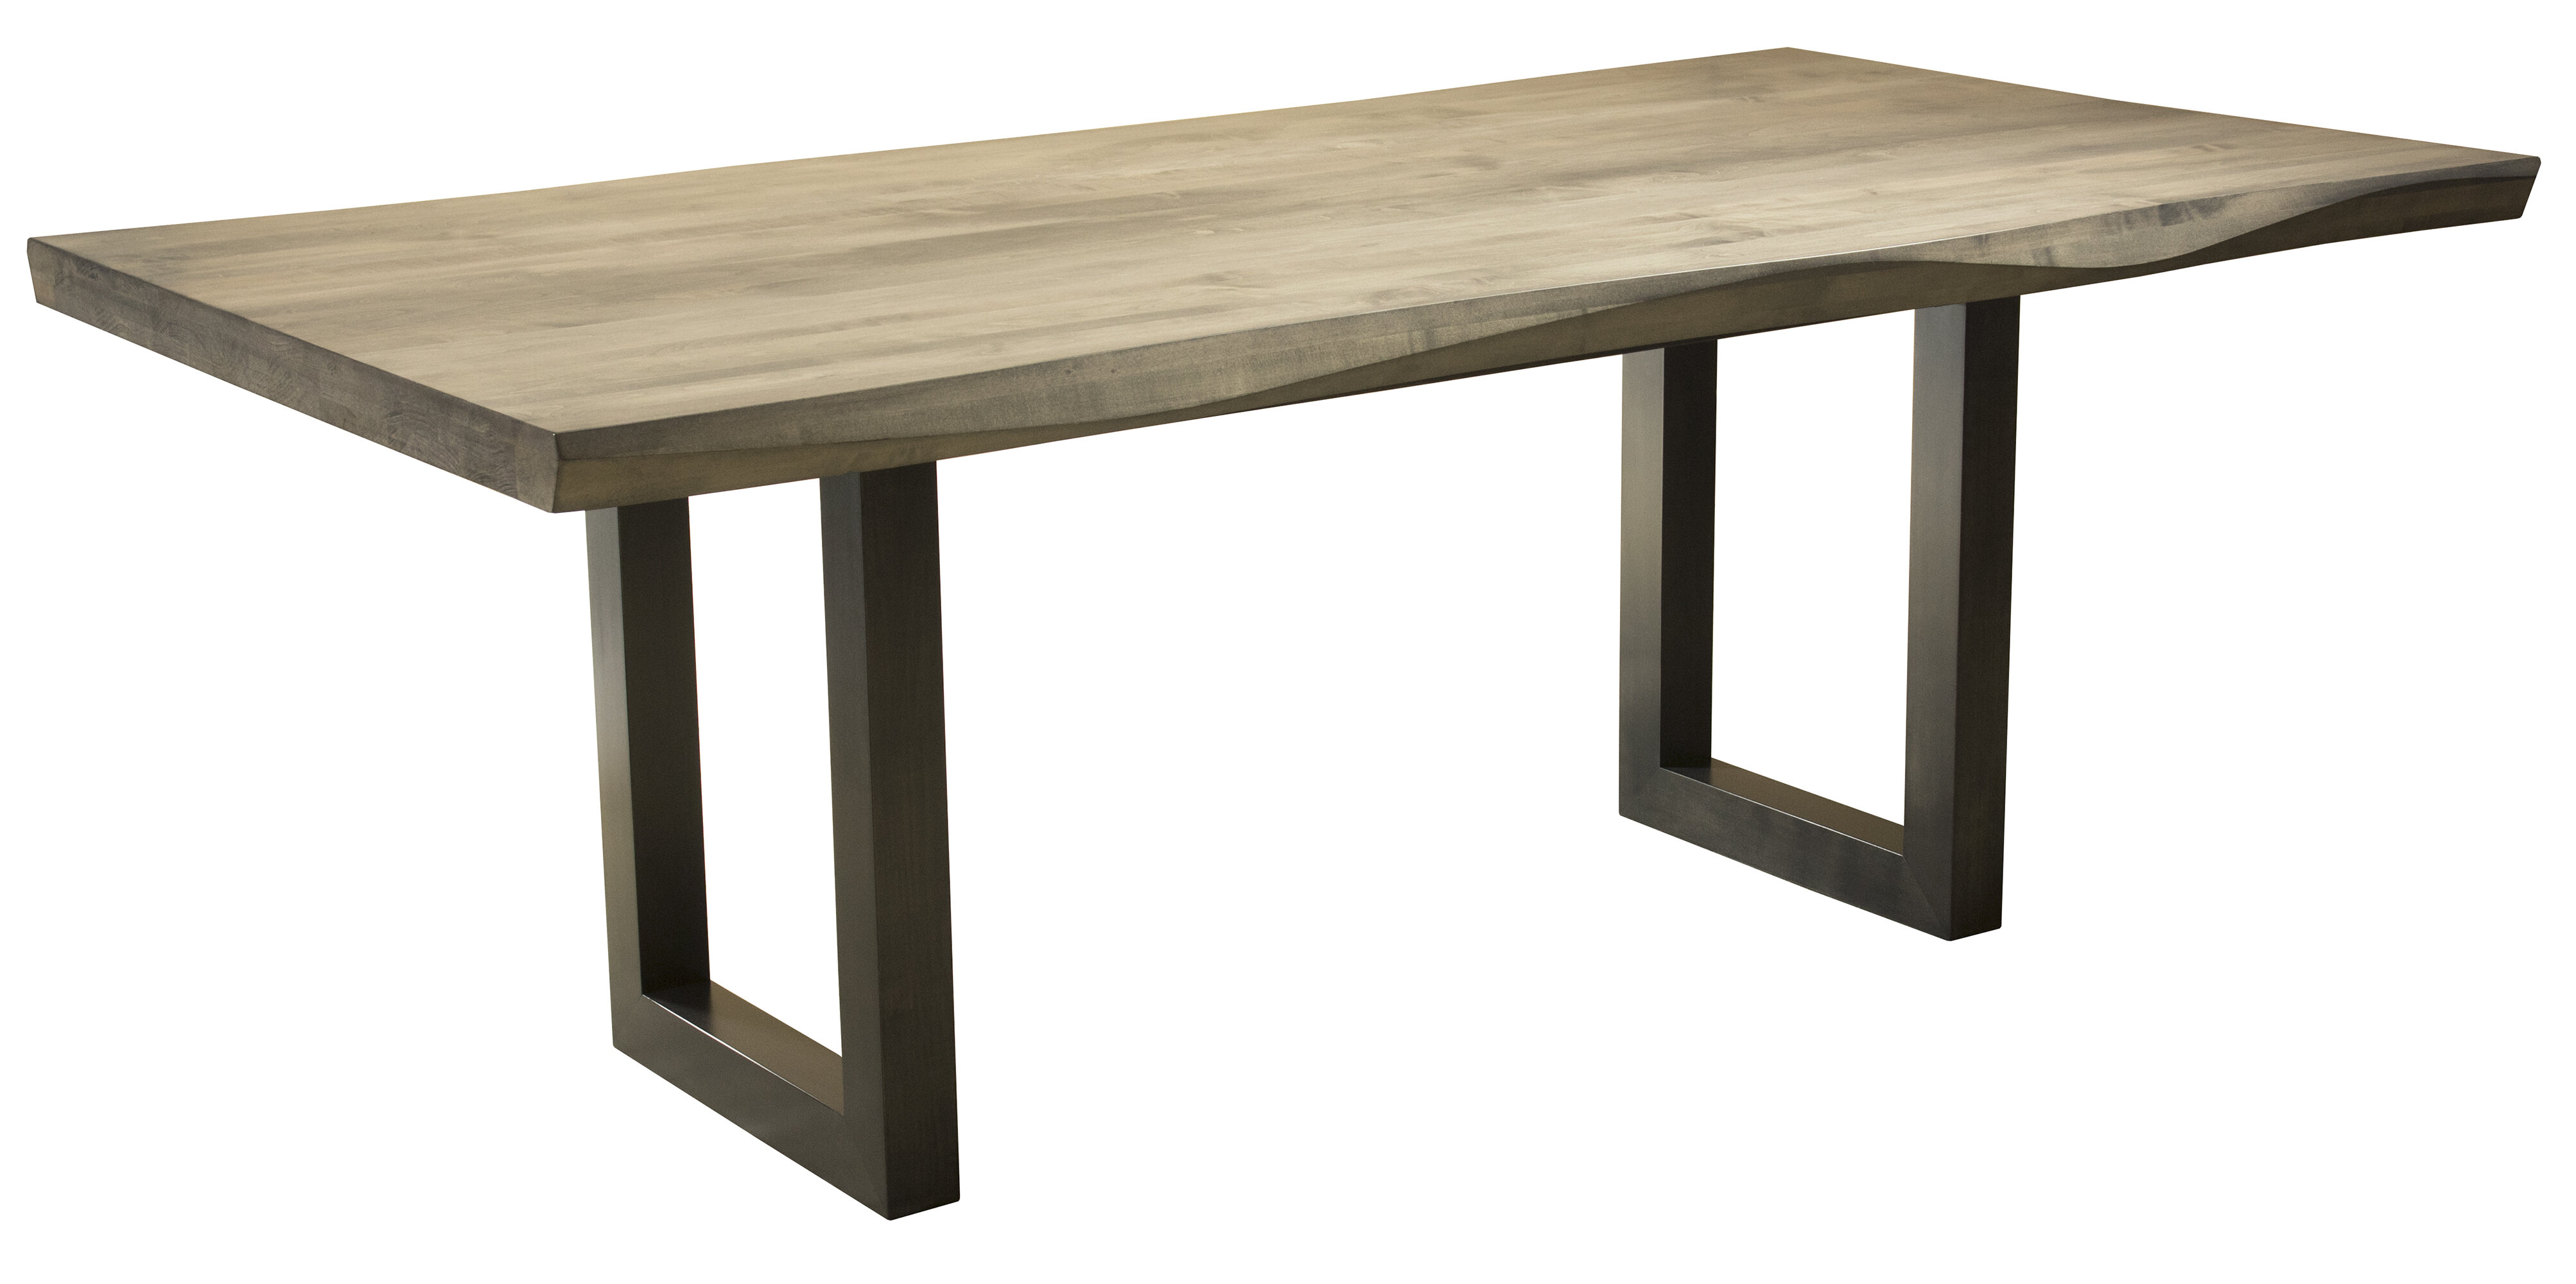 Contemporary Square Dining Kitchen Solid  Wood Table in Maple Finish 